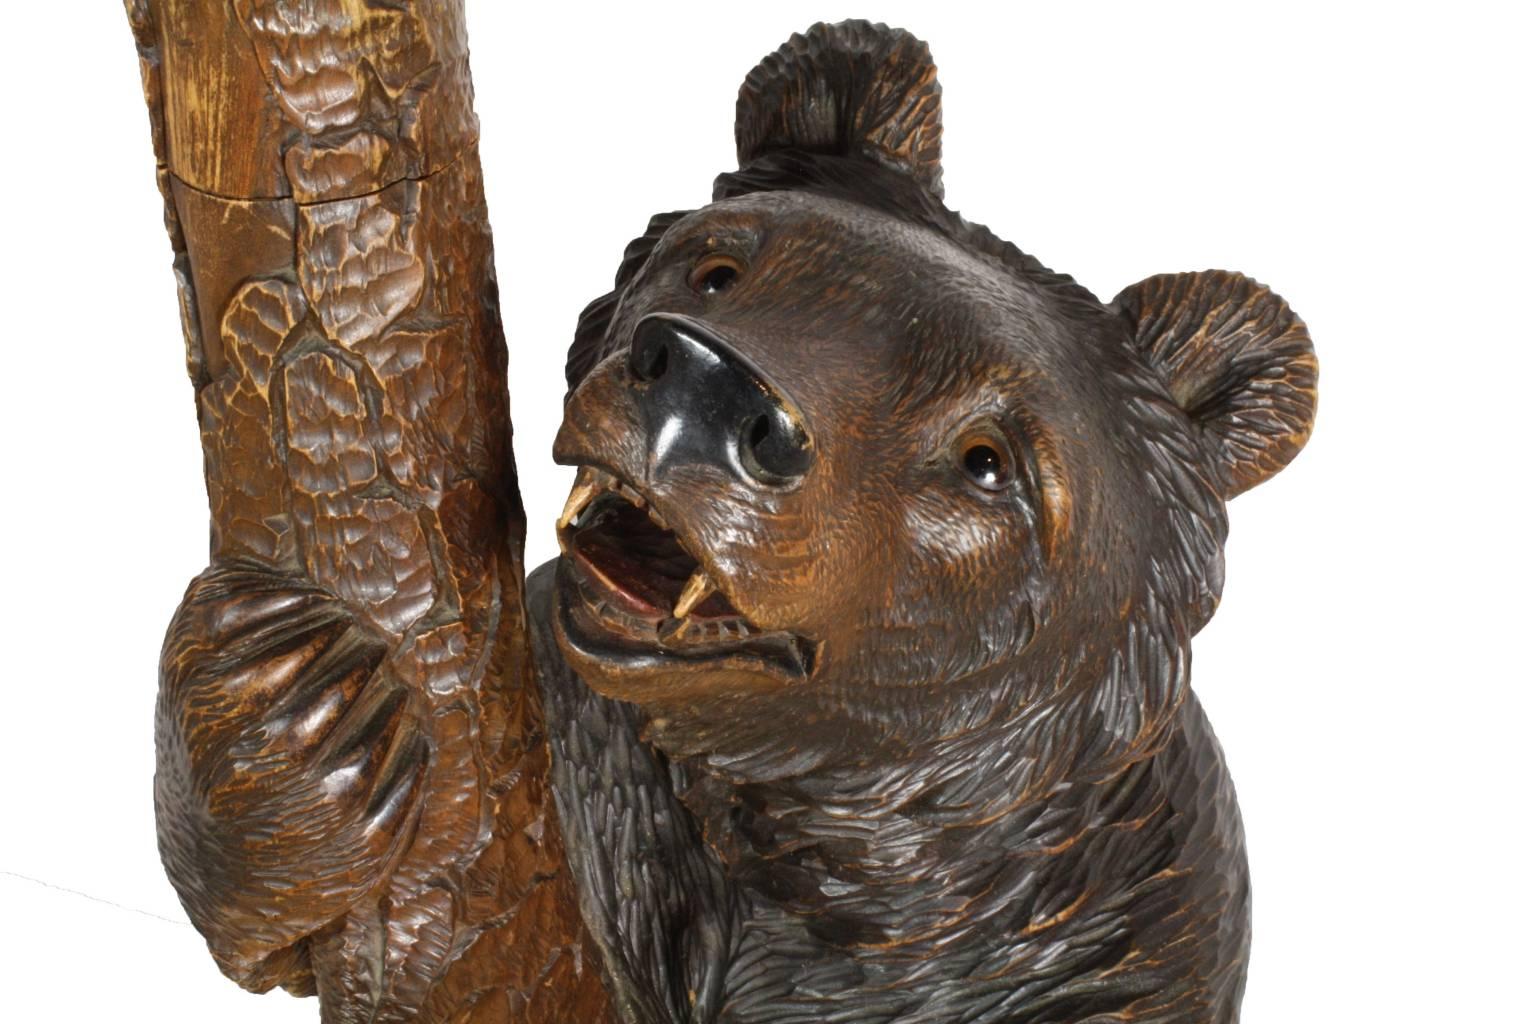 An excellent example of turn of the century Brienz Swiss carving in linden wood. There are many Swiss carvers well known for carving certain subjects and Seilar-Brawant is known for bears. Standing at over six feet in height with a lovely beveled